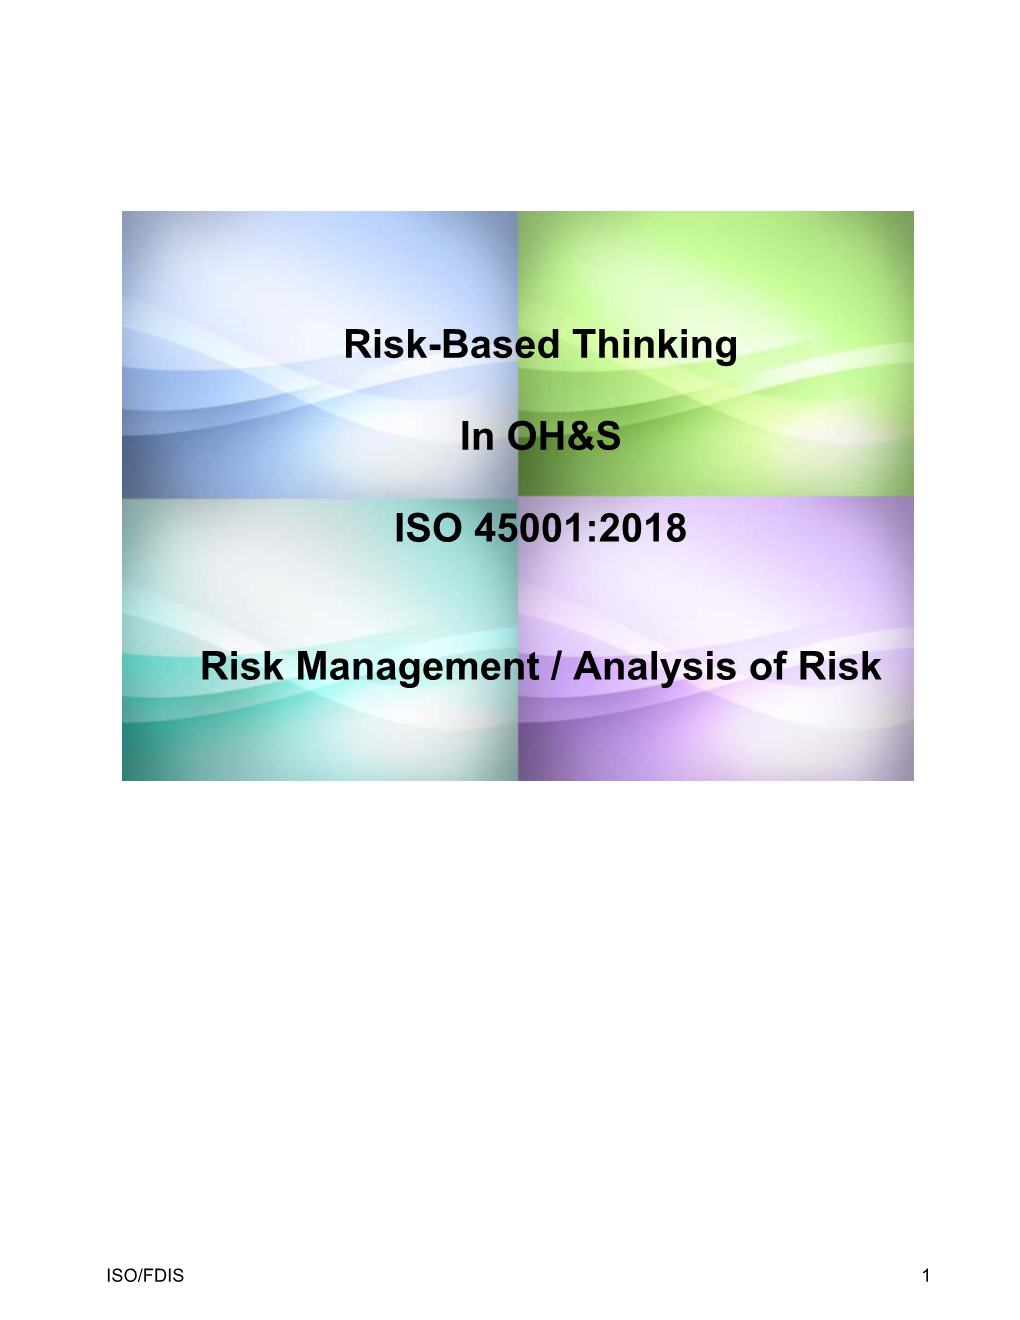 Risk-Based Thinking in OH&S ISO 45001:2018 Risk Management